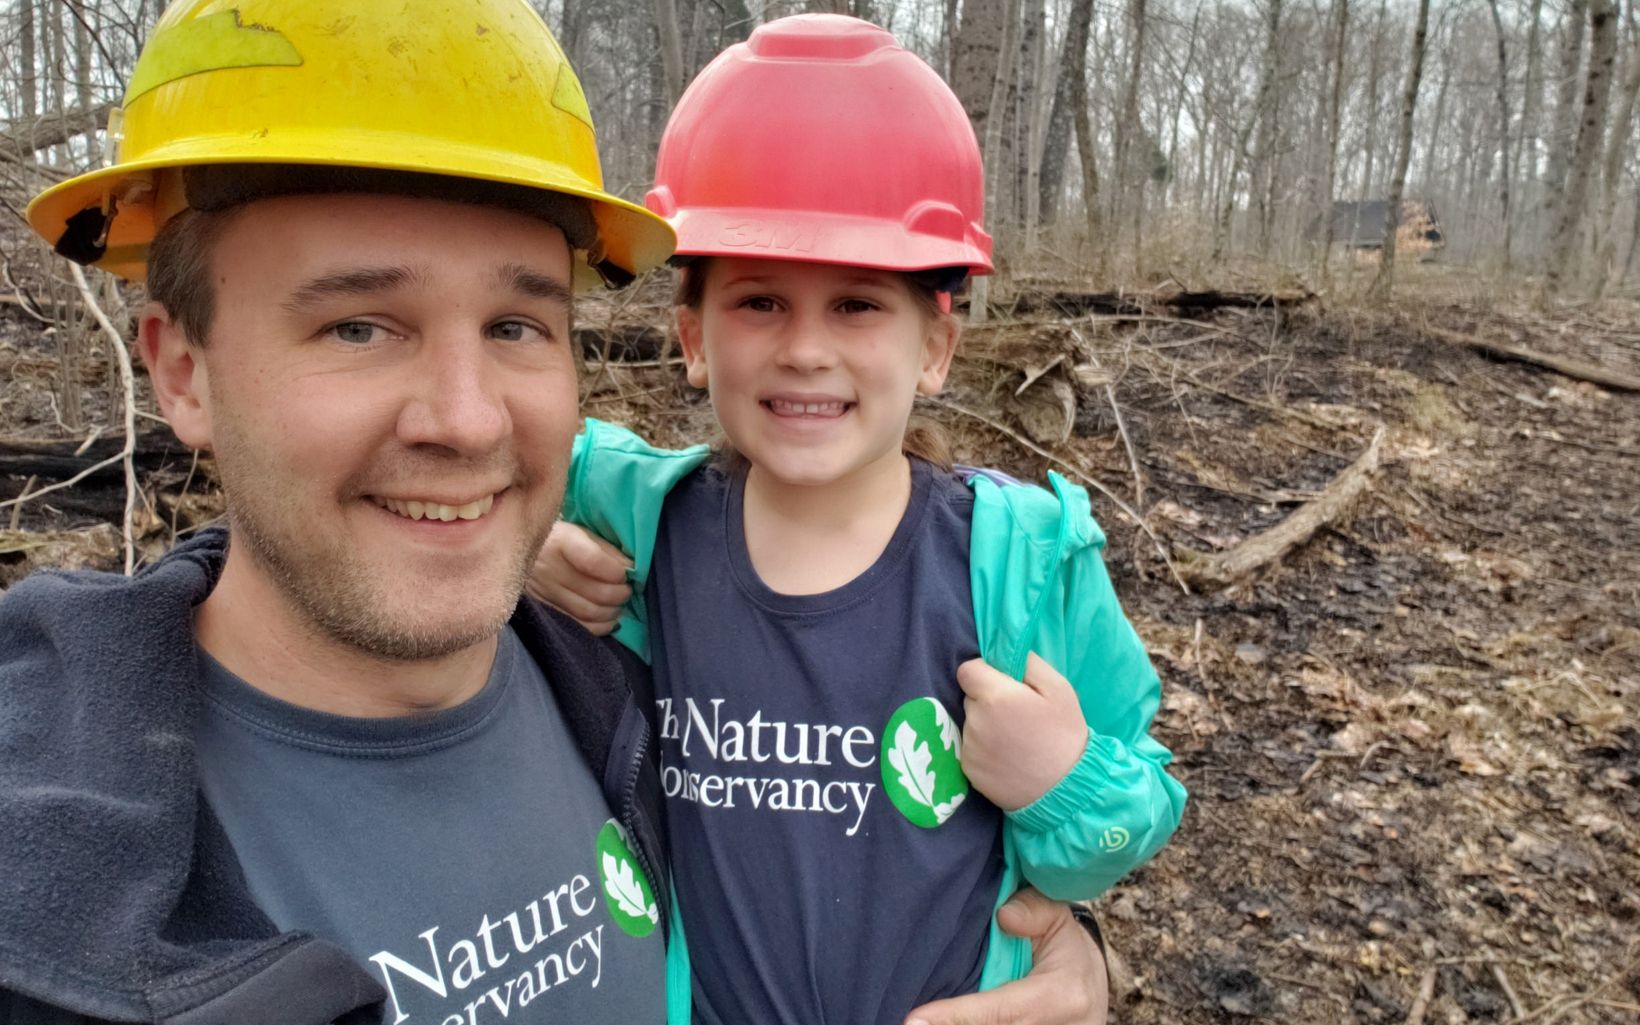 Indiana Chapter forester Chris Neggers and daughter Diana, 2019.